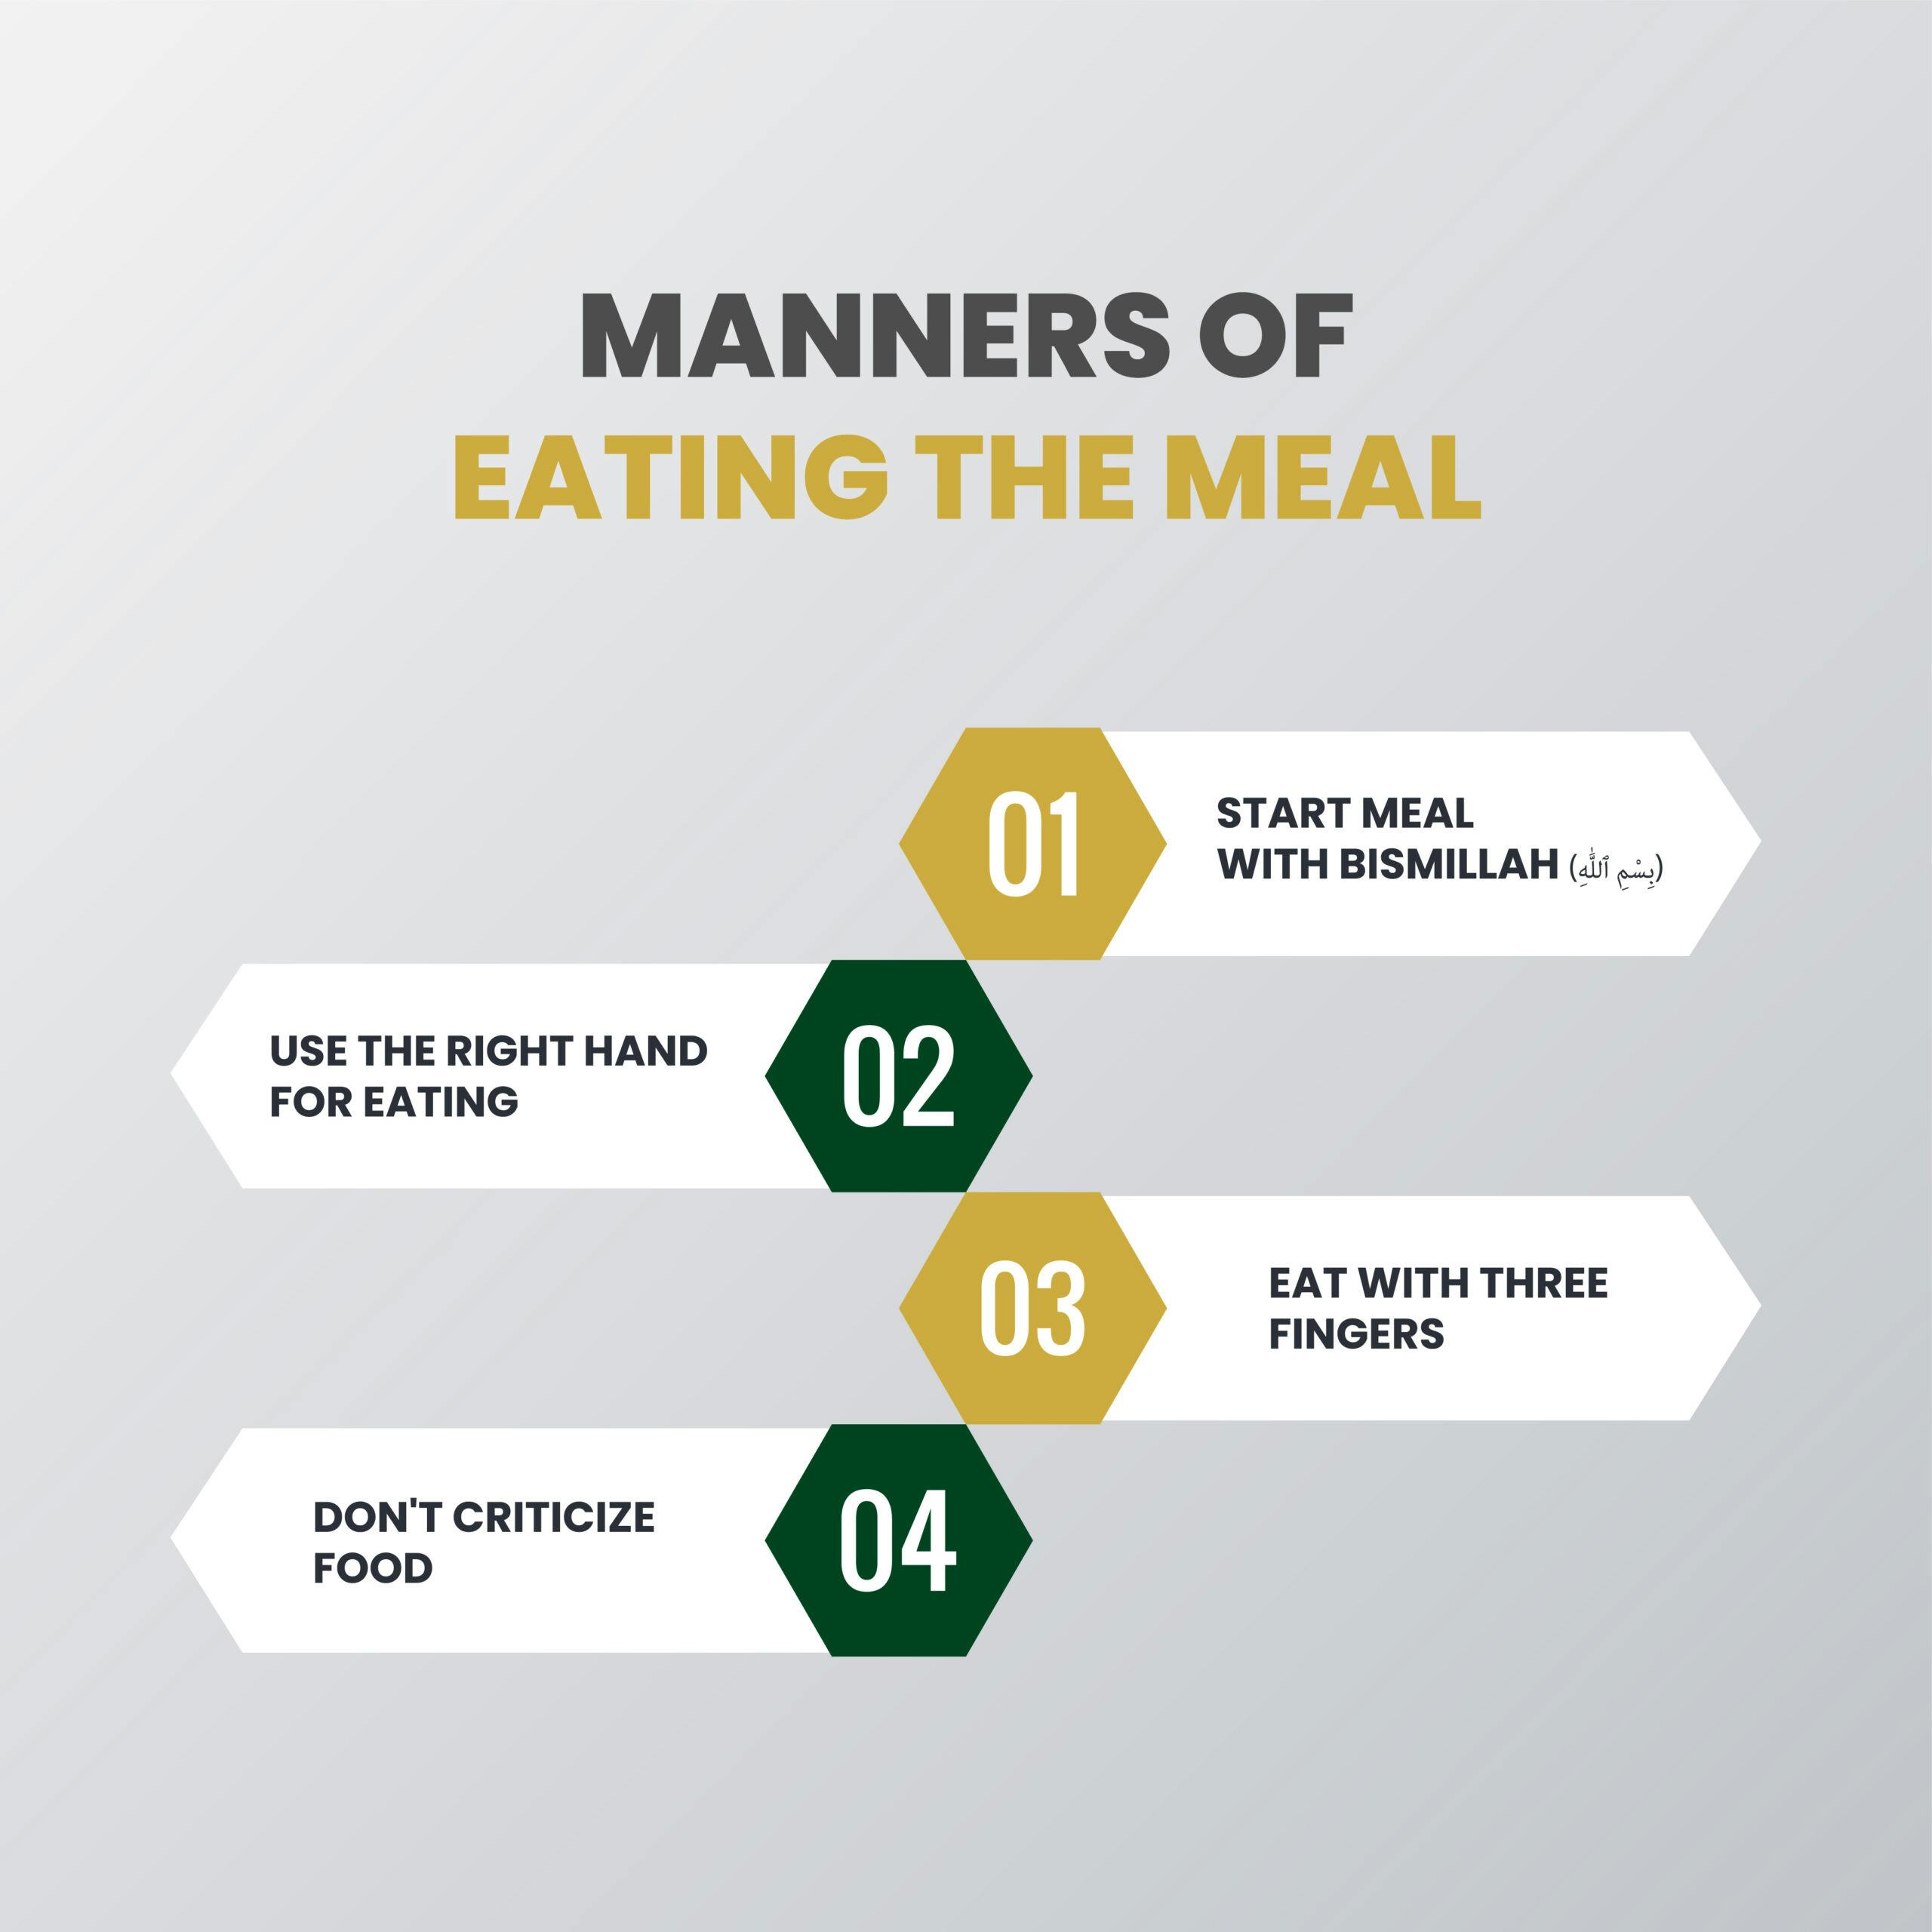 Manners of eating in meal